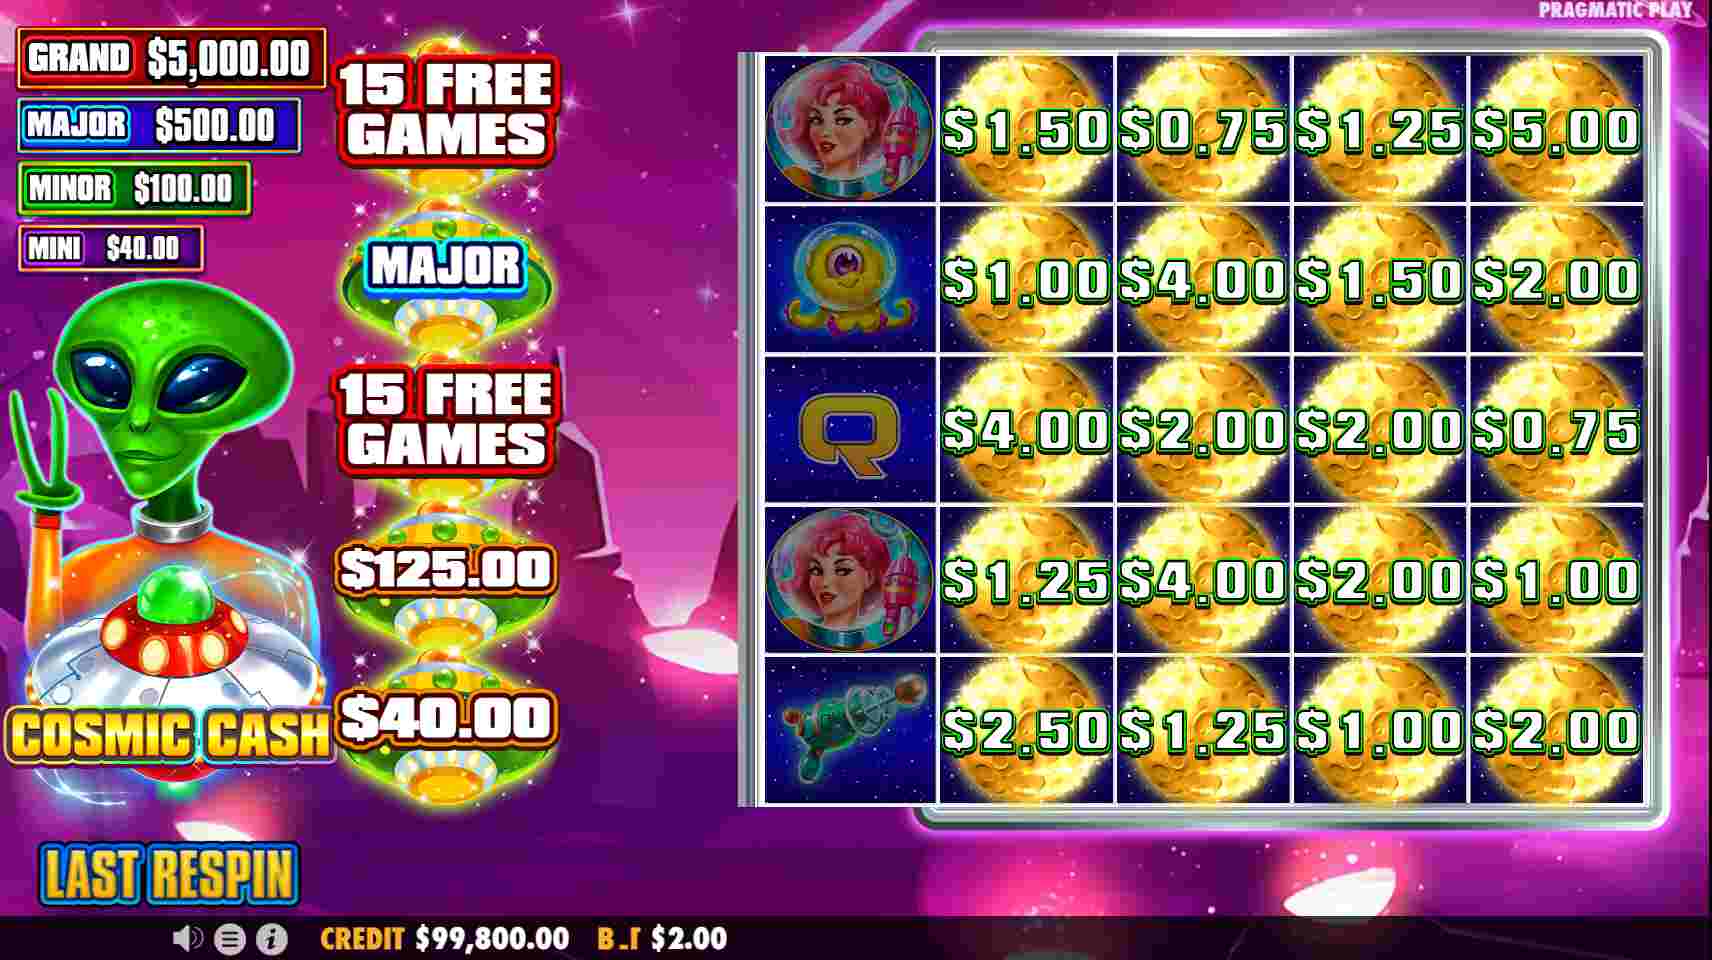 Cosmic Cash Respins Feature